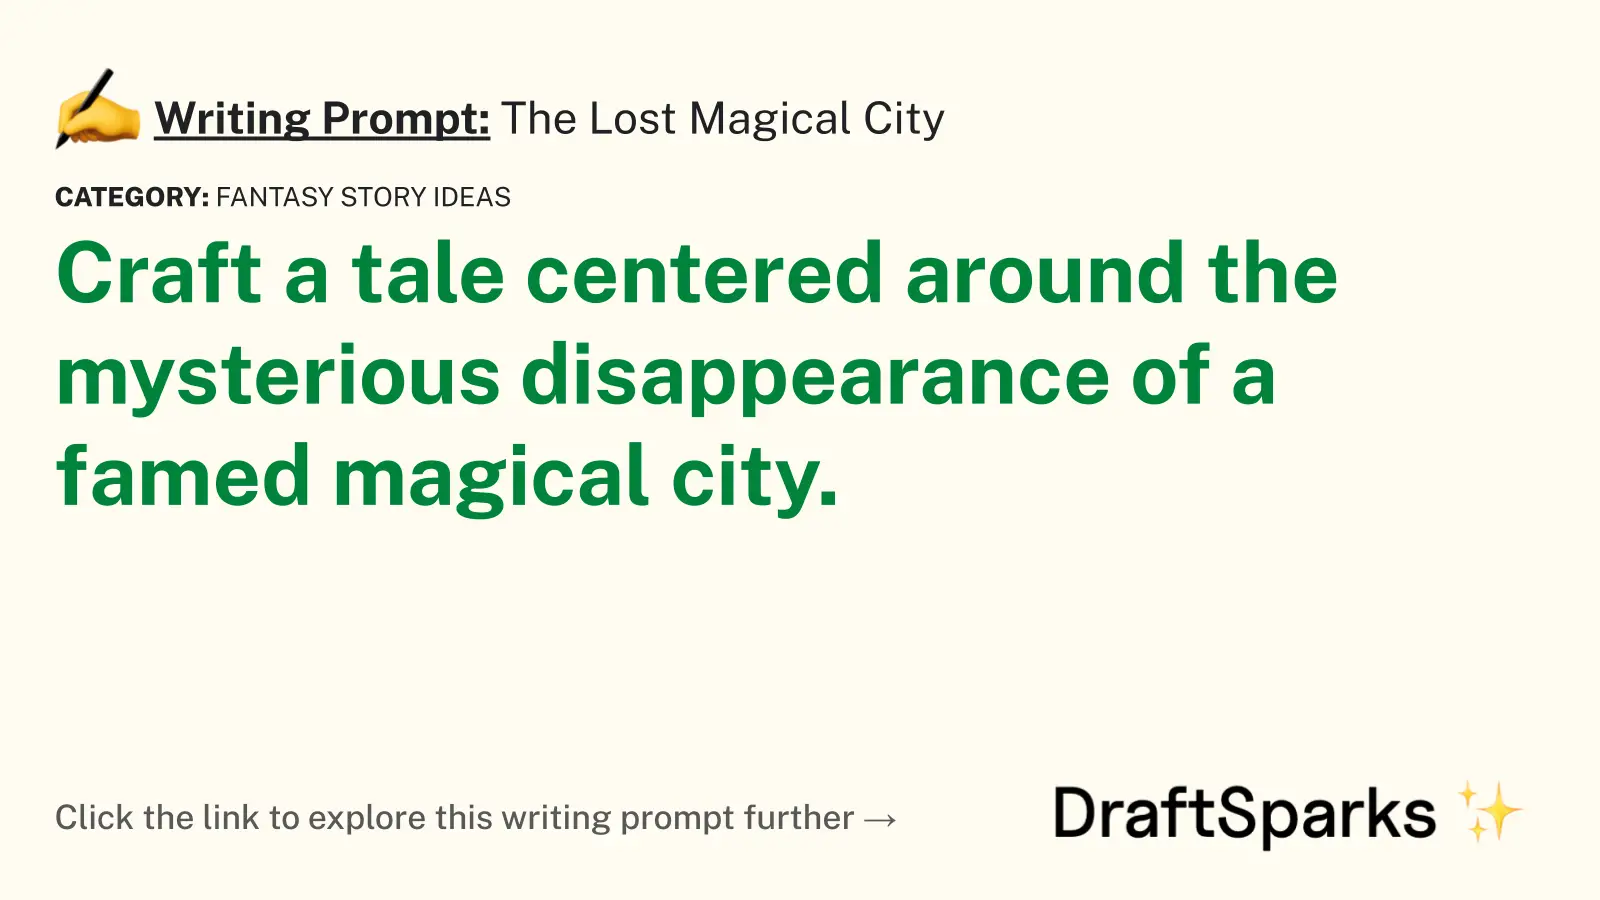 The Lost Magical City